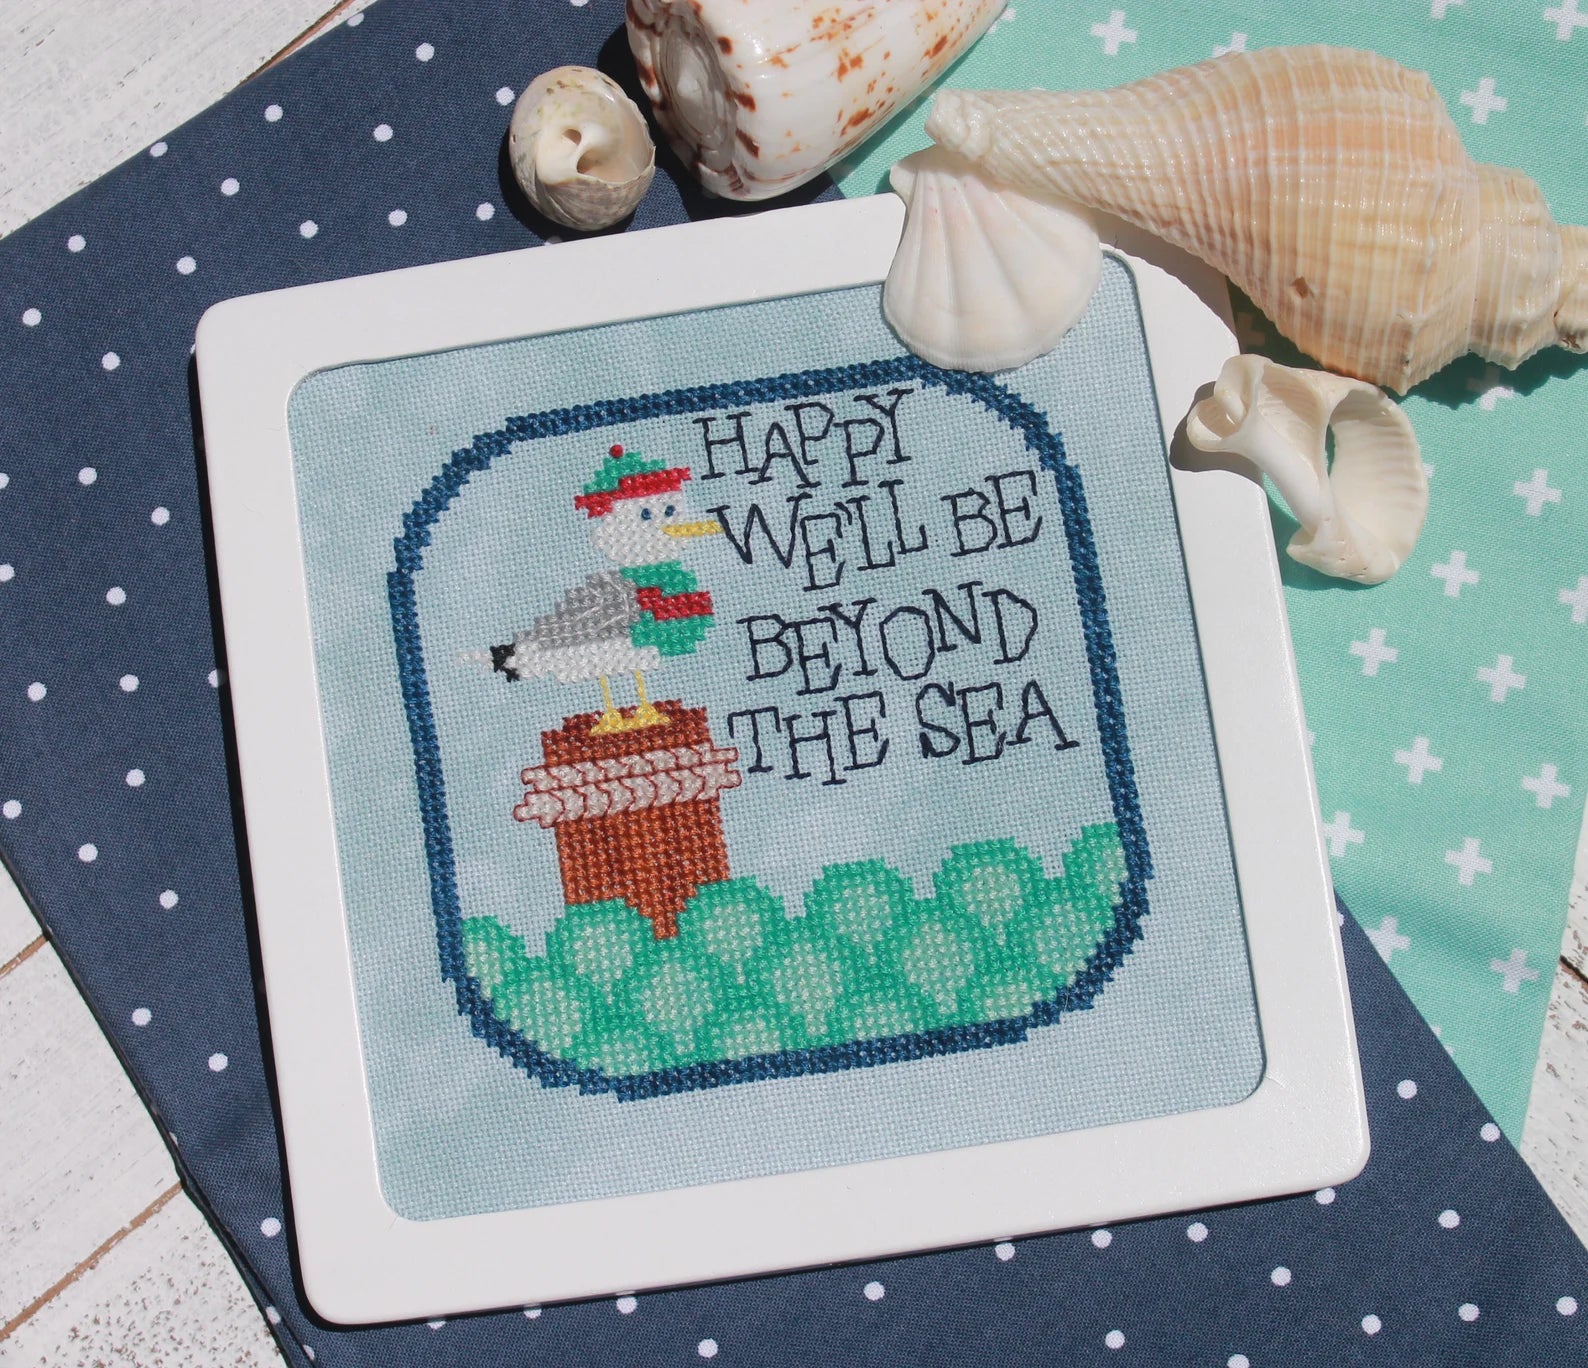 Beyond the Sea by Luhu Stitches